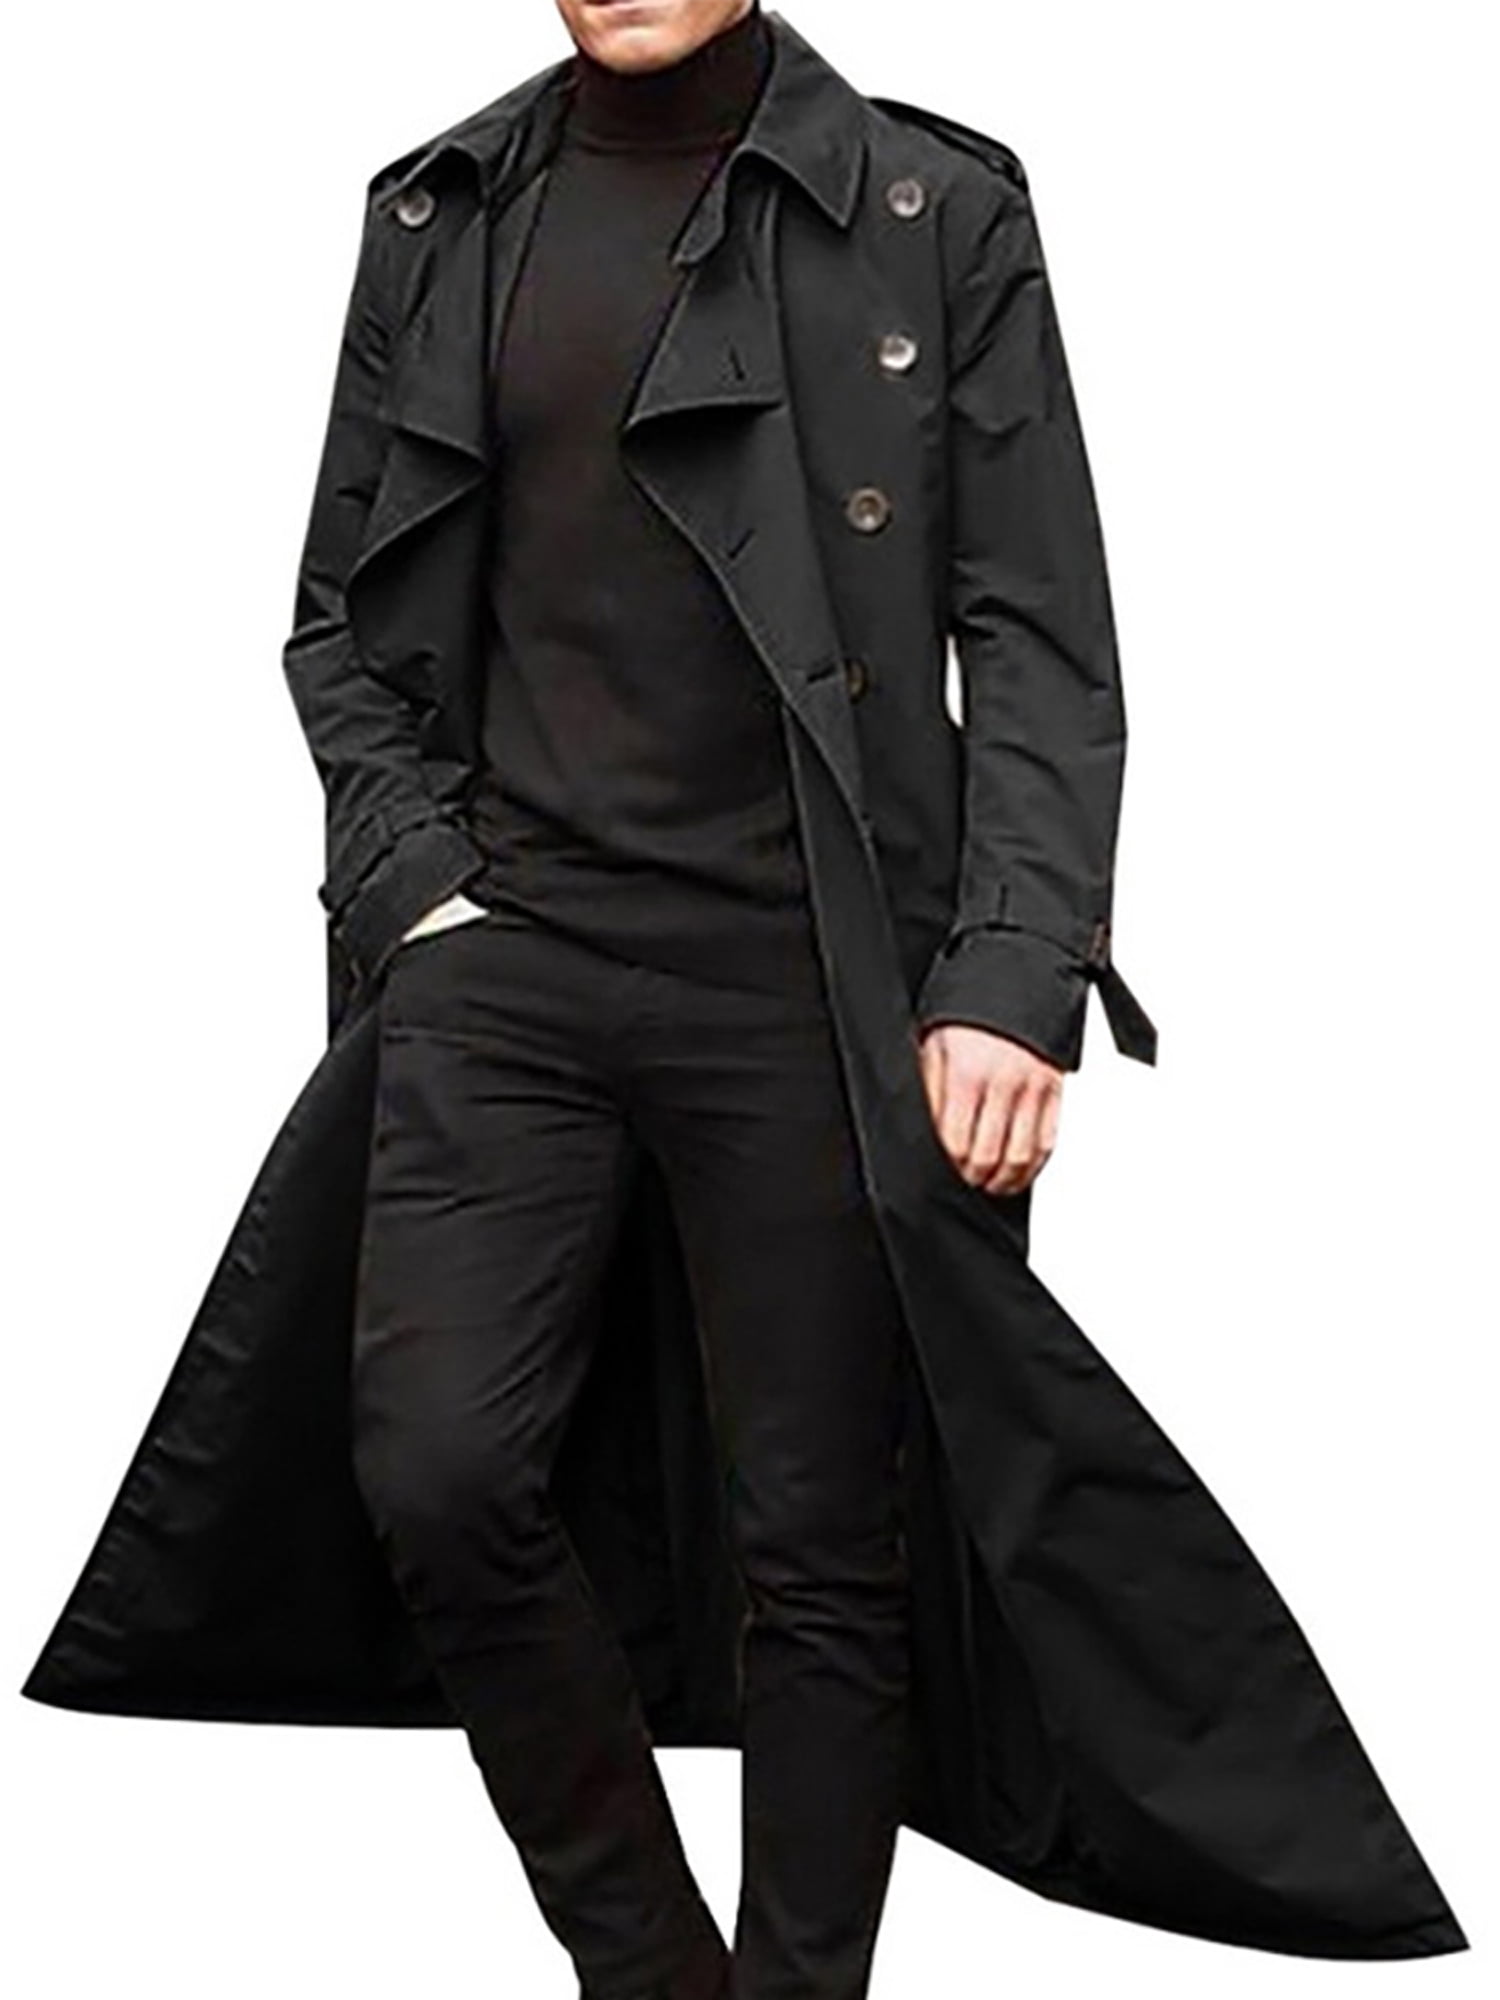 Mens Double Breasted Trench Coat Winter Warm Long Parka Jacket Overcoat Outwear